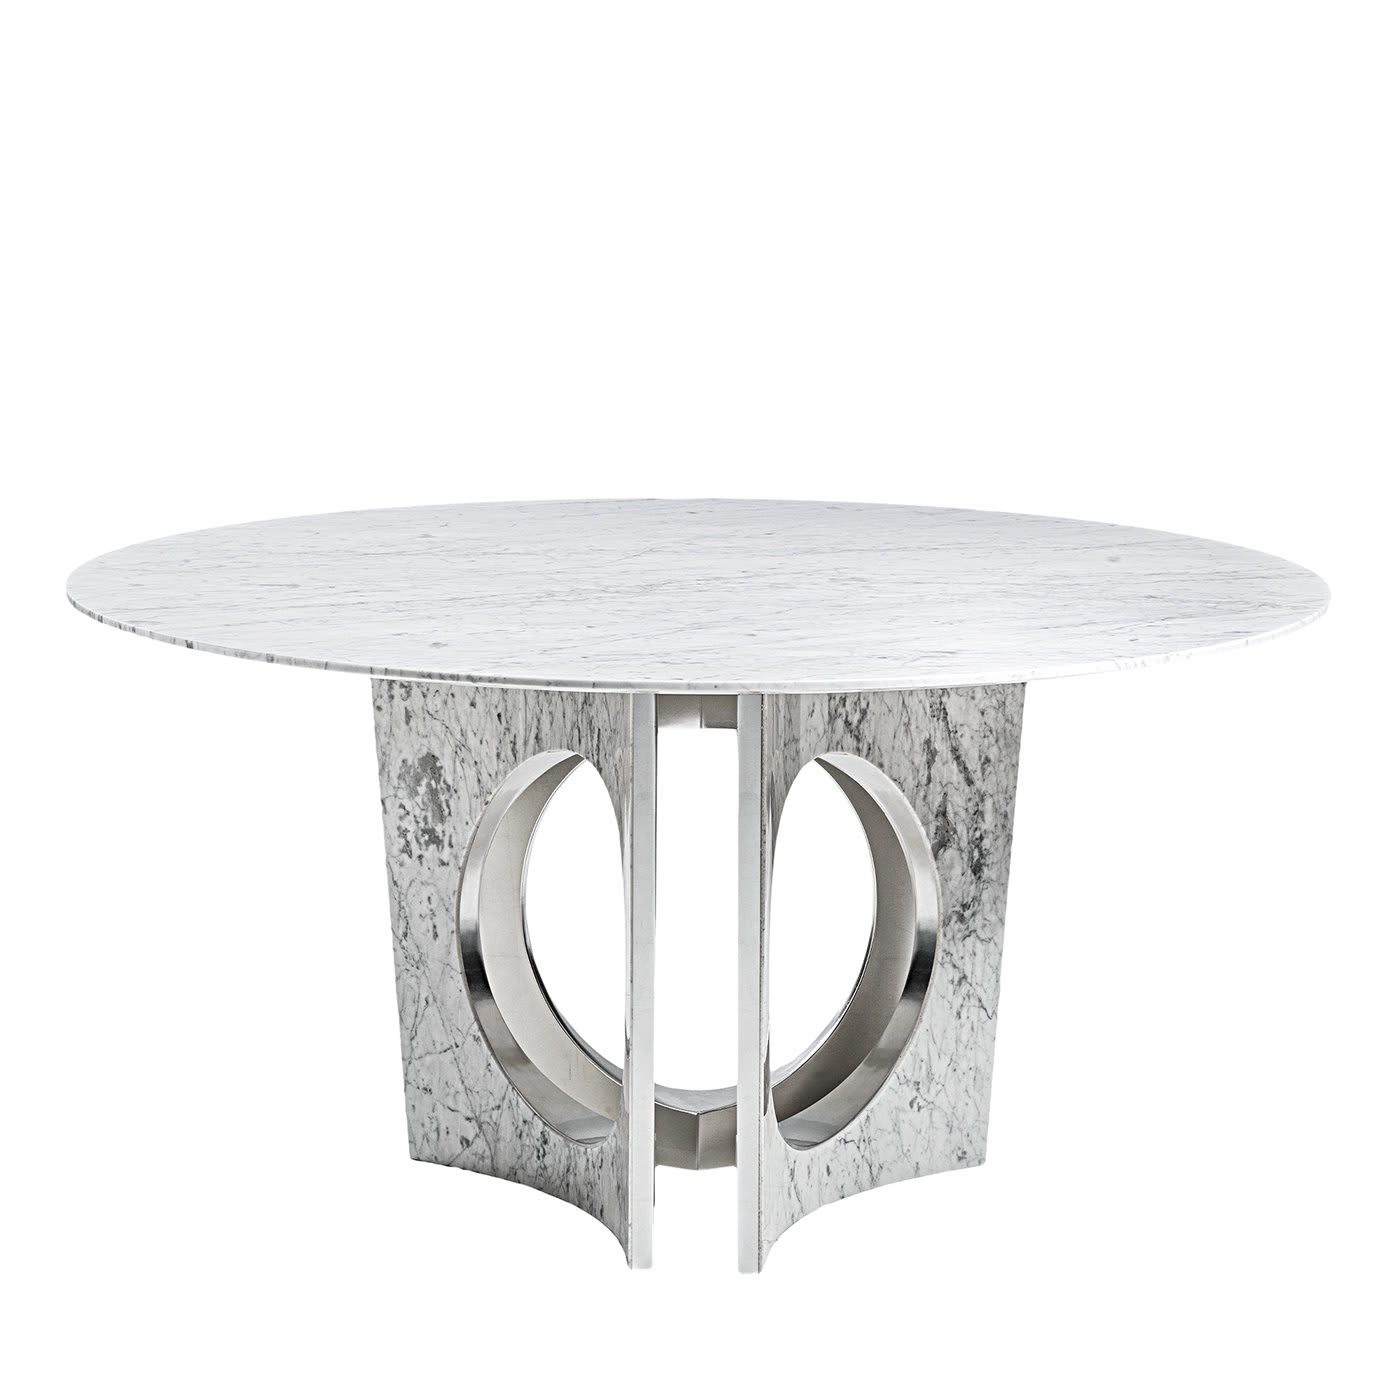 Michelangelo Round Dining Table by Carlo Bimbi - Annibale Colombo